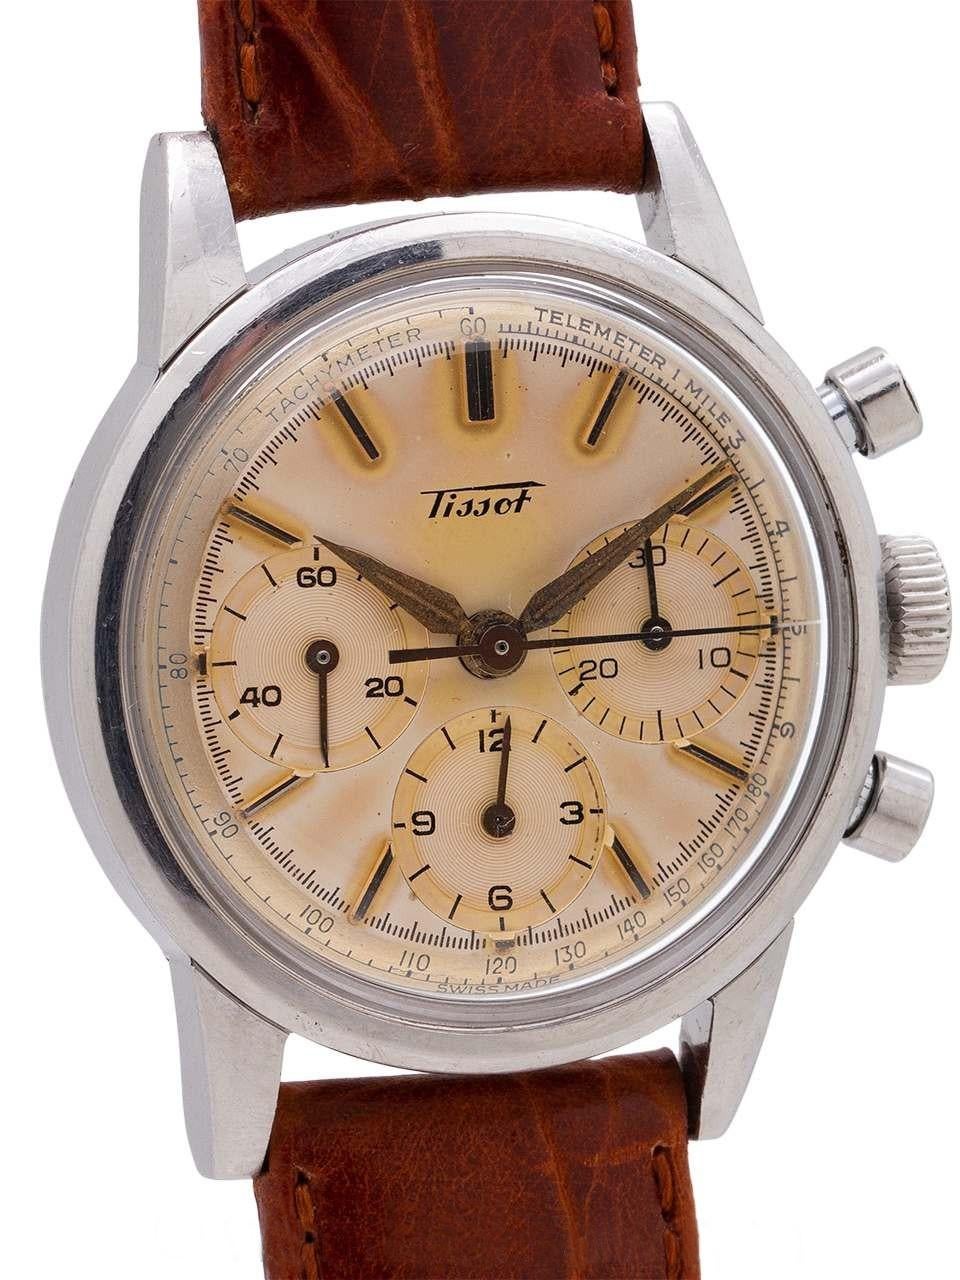 Brand:Tissot
Model:Vintage “Sunburst” Chronograph
Gender:Men
Period:1950-1959
Movement:Mechanical hand winding
Case material:Steel
Extras:No Box & No Papers
Type:Chronograph wristwatch
Shipped Insured:Yes
Condition:In working condition with visible